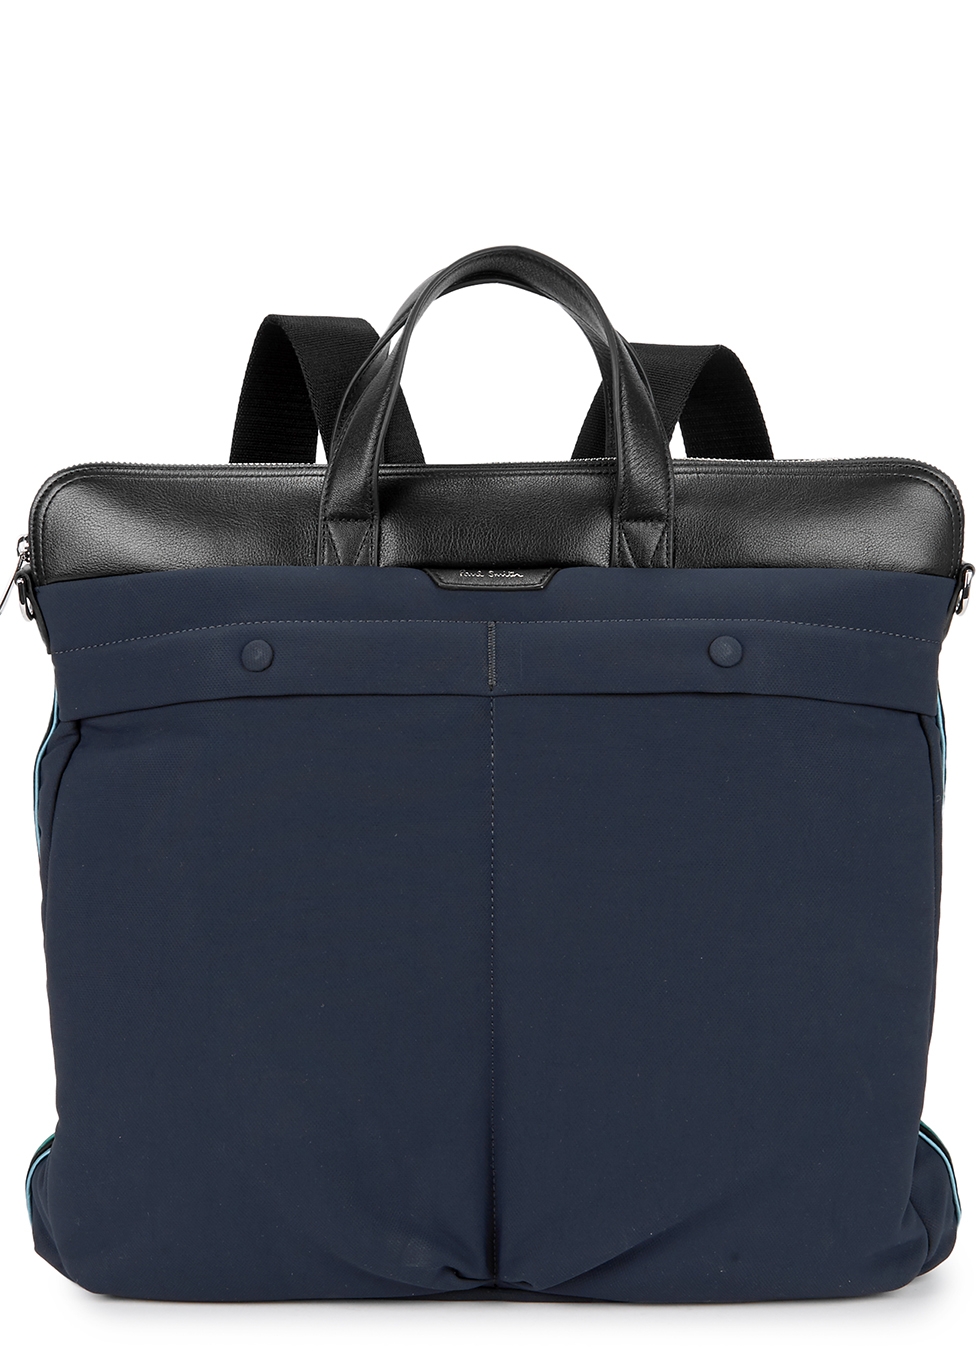 Paul Smith Navy leather-trimmed backpack - Harvey Nichols